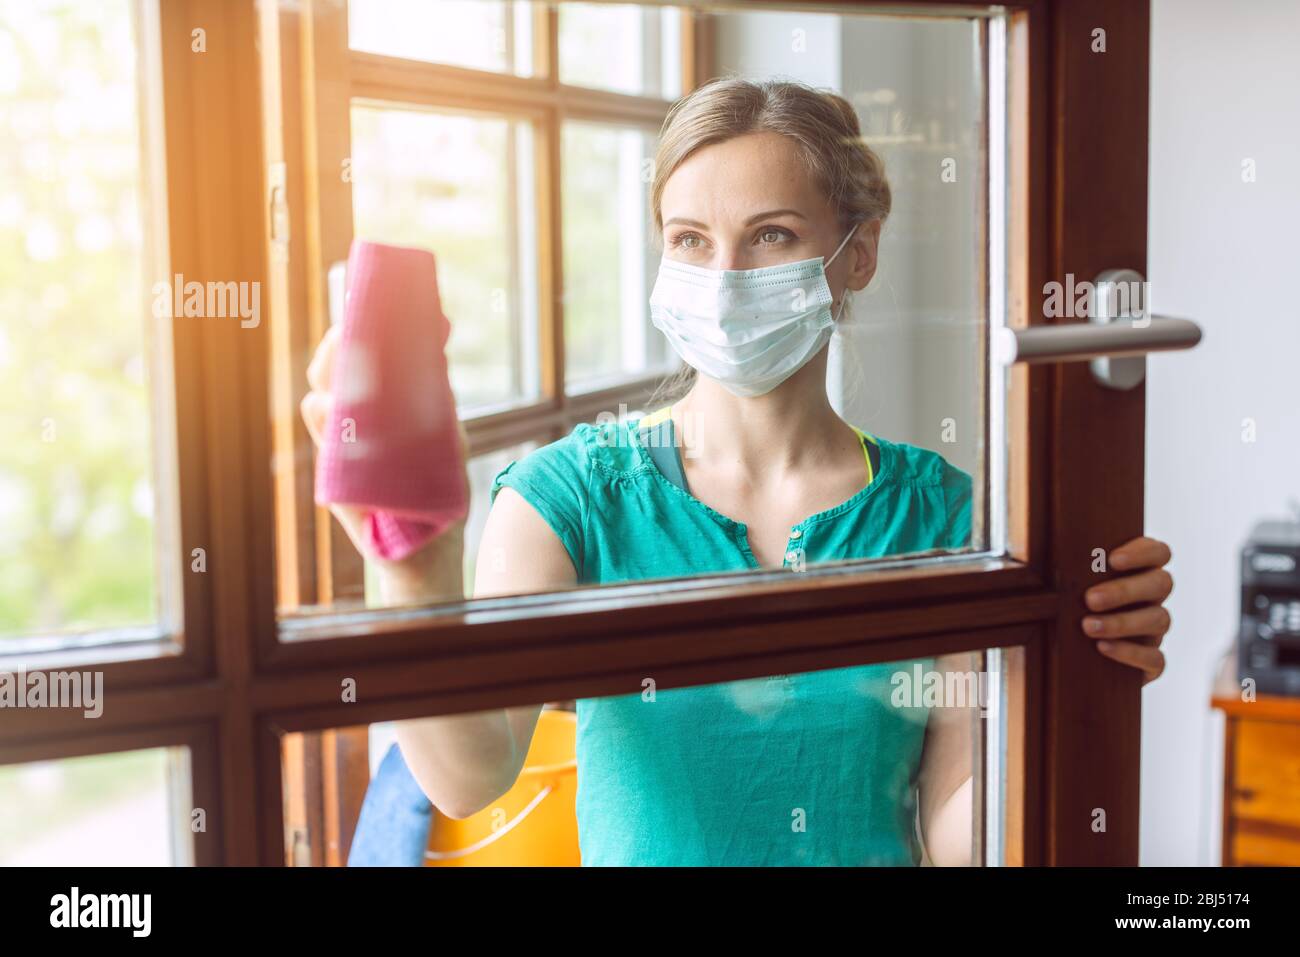 Woman cleaning windows during covid-19 lockdown Stock Photo